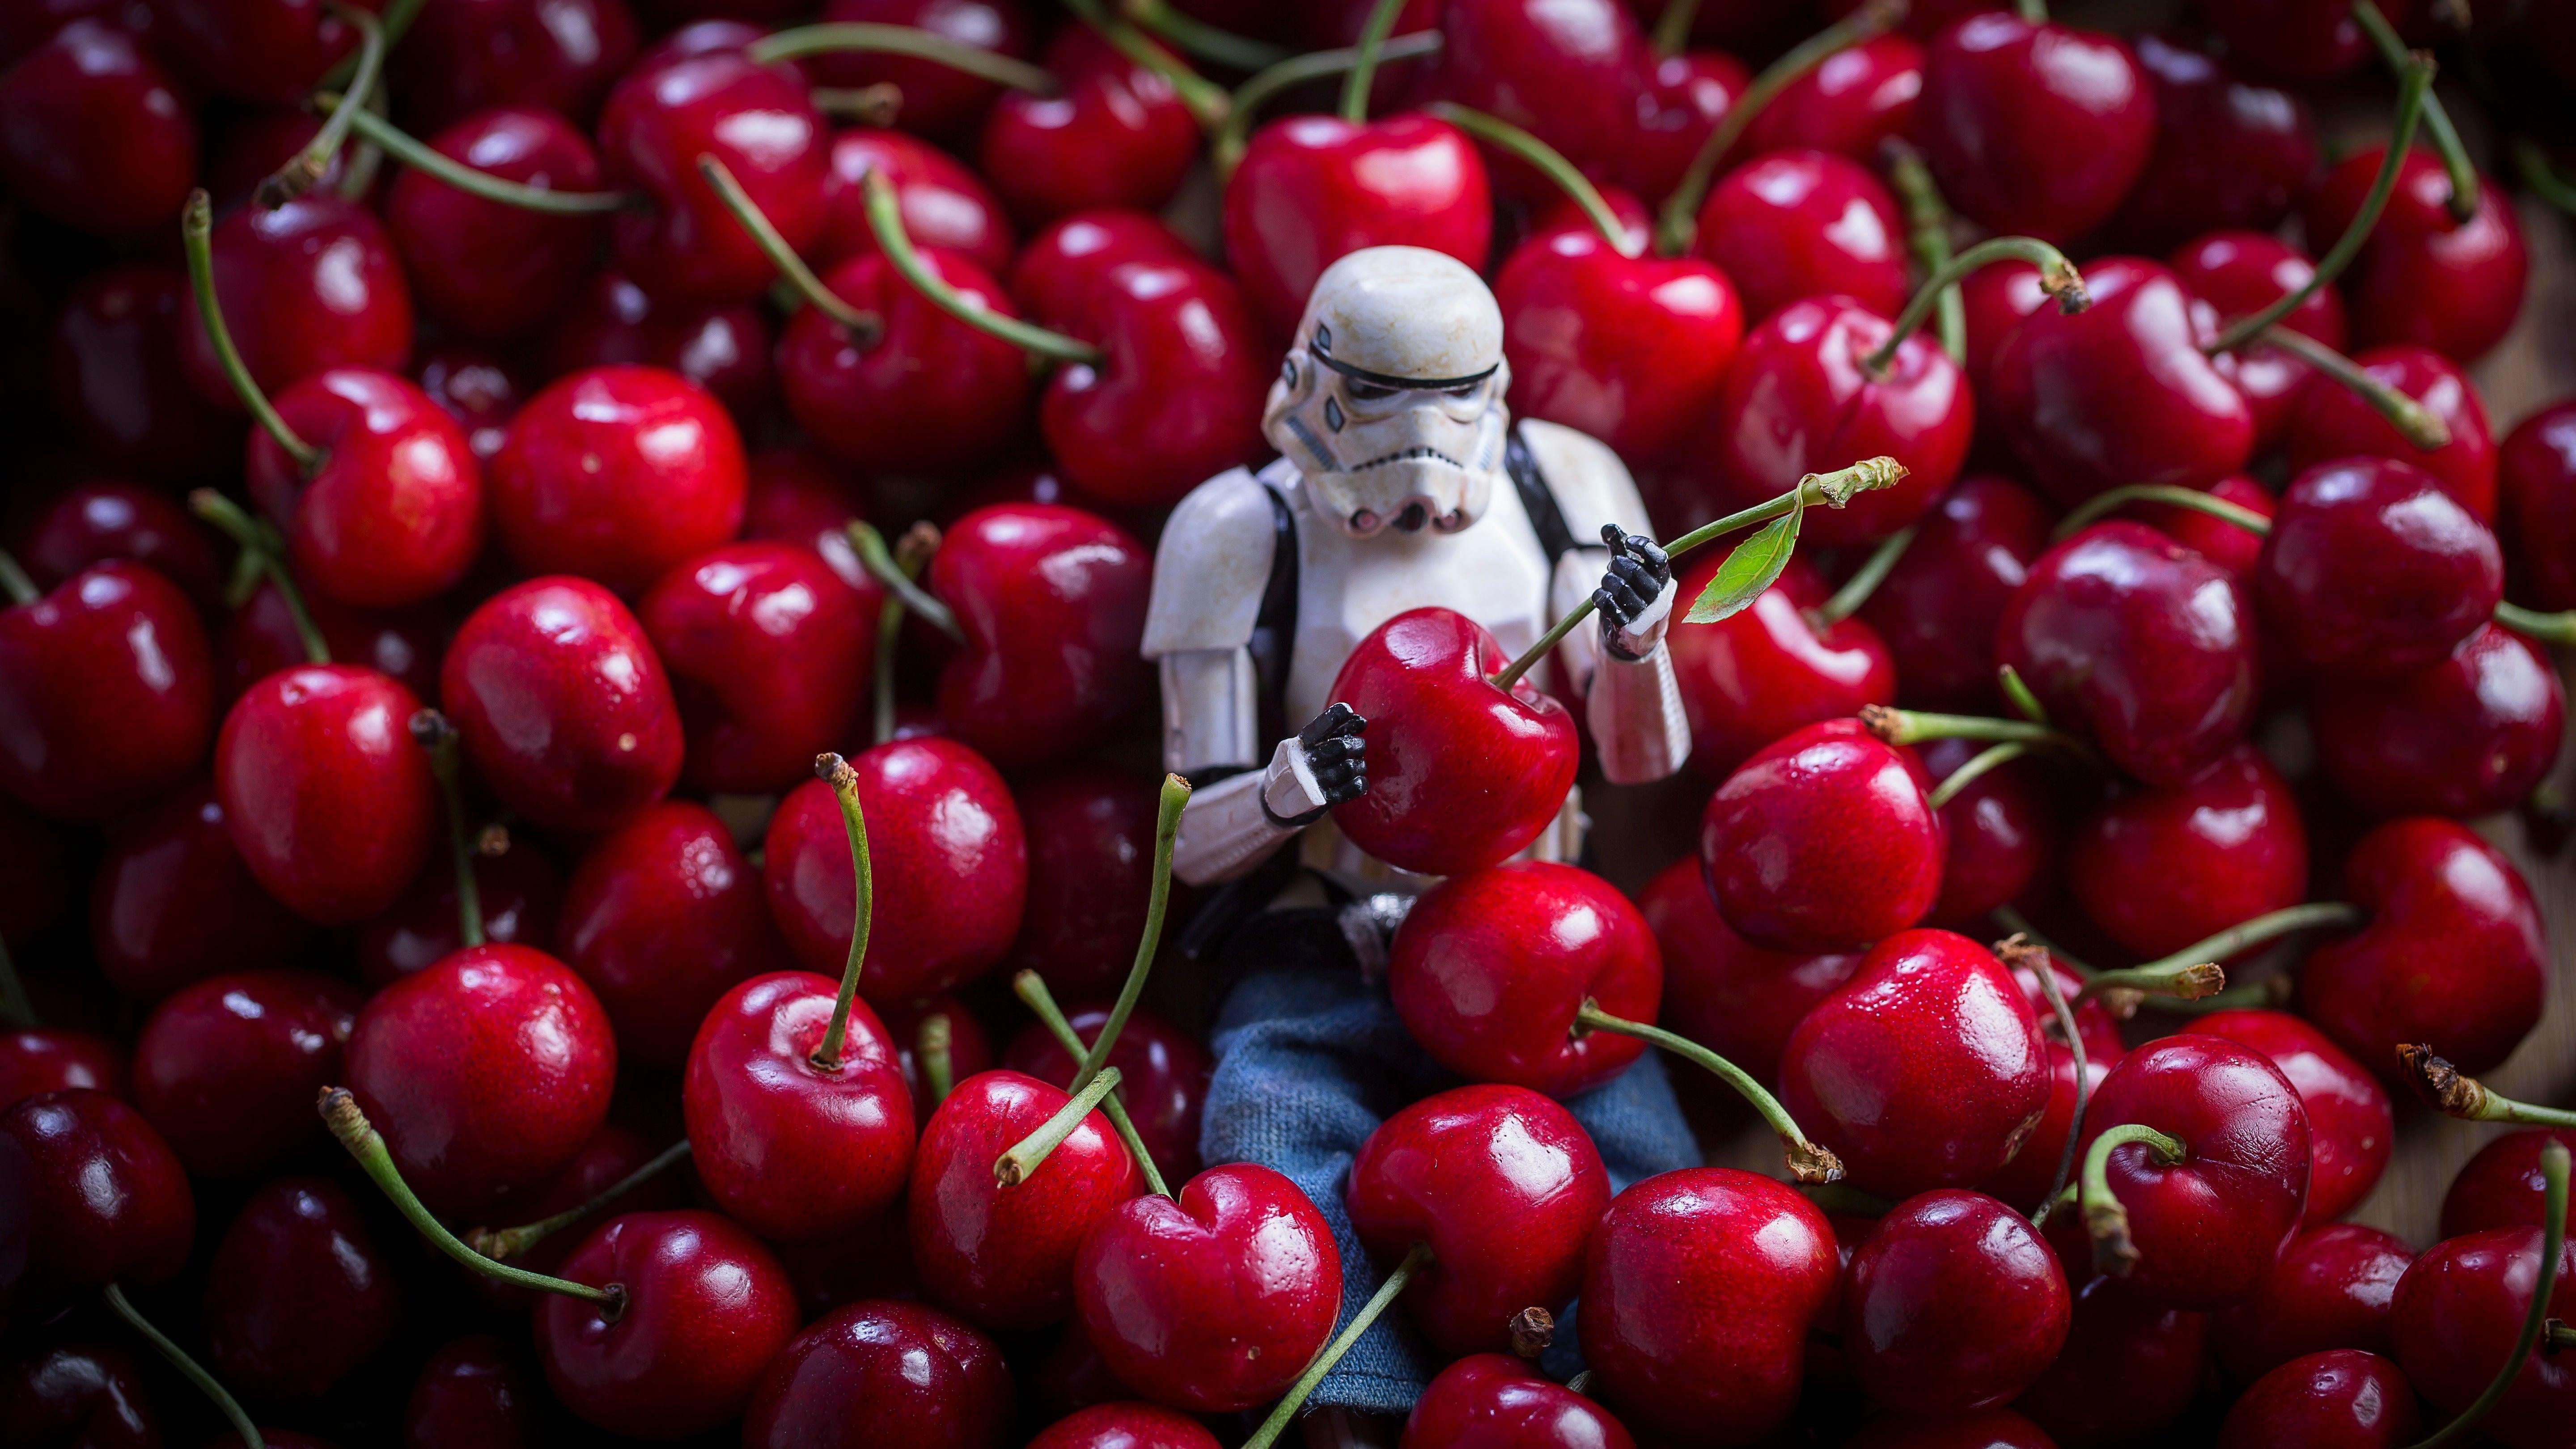 8 Delightful Pictures of Eric, One of the Most Famous Star Wars Toys on Instagram